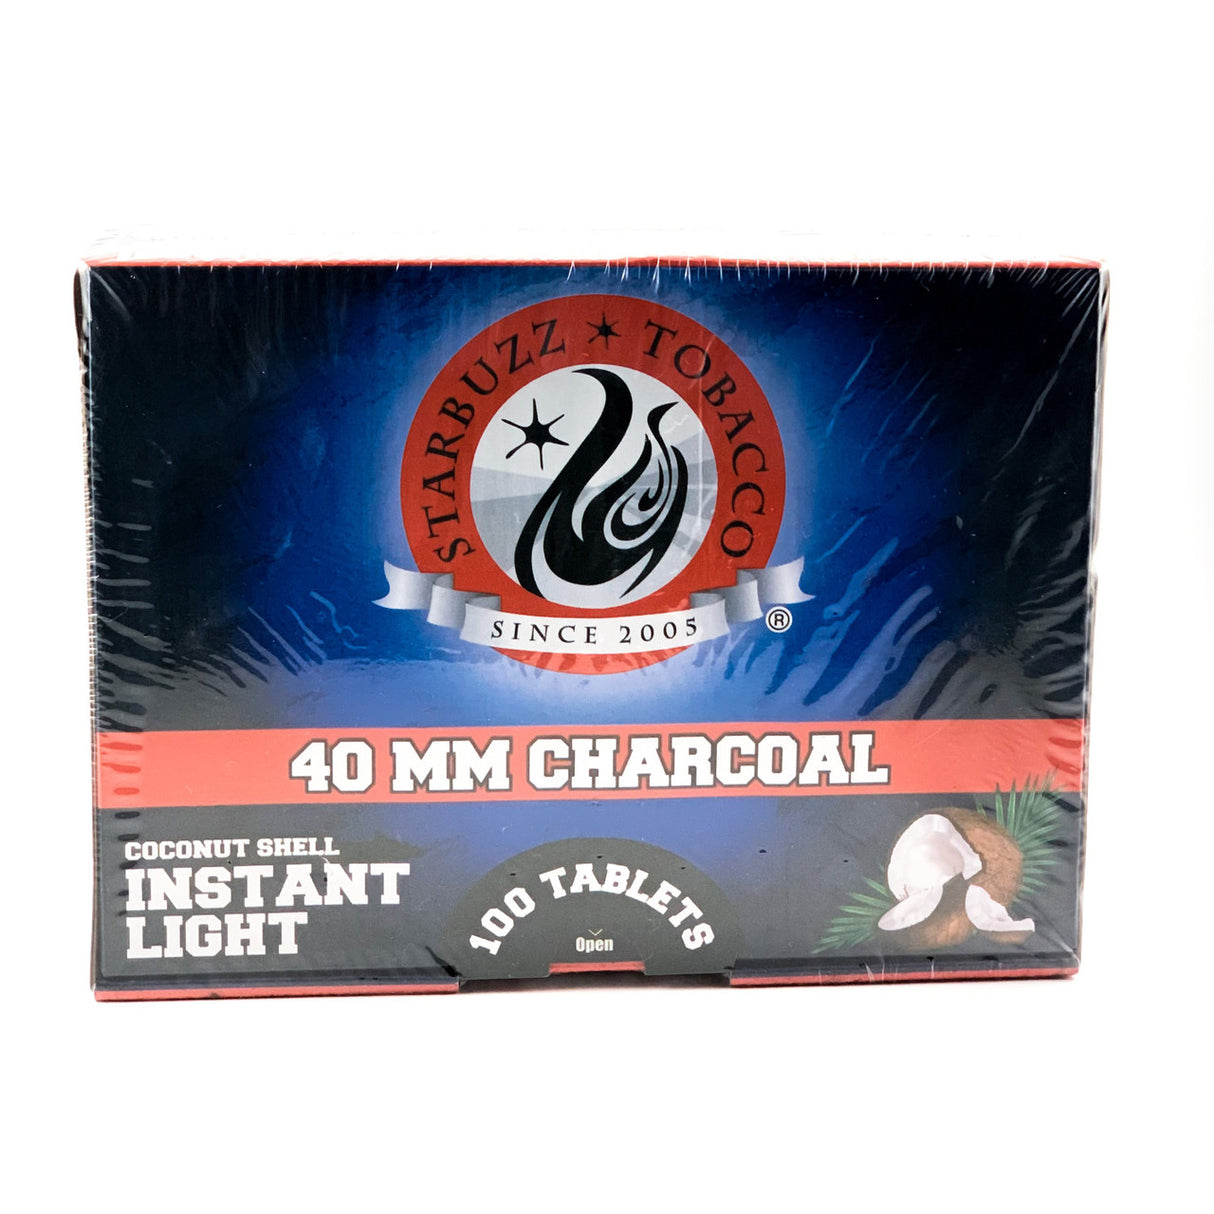 Starbuzz 40mm Charcoal Coconut Shell Instant Light